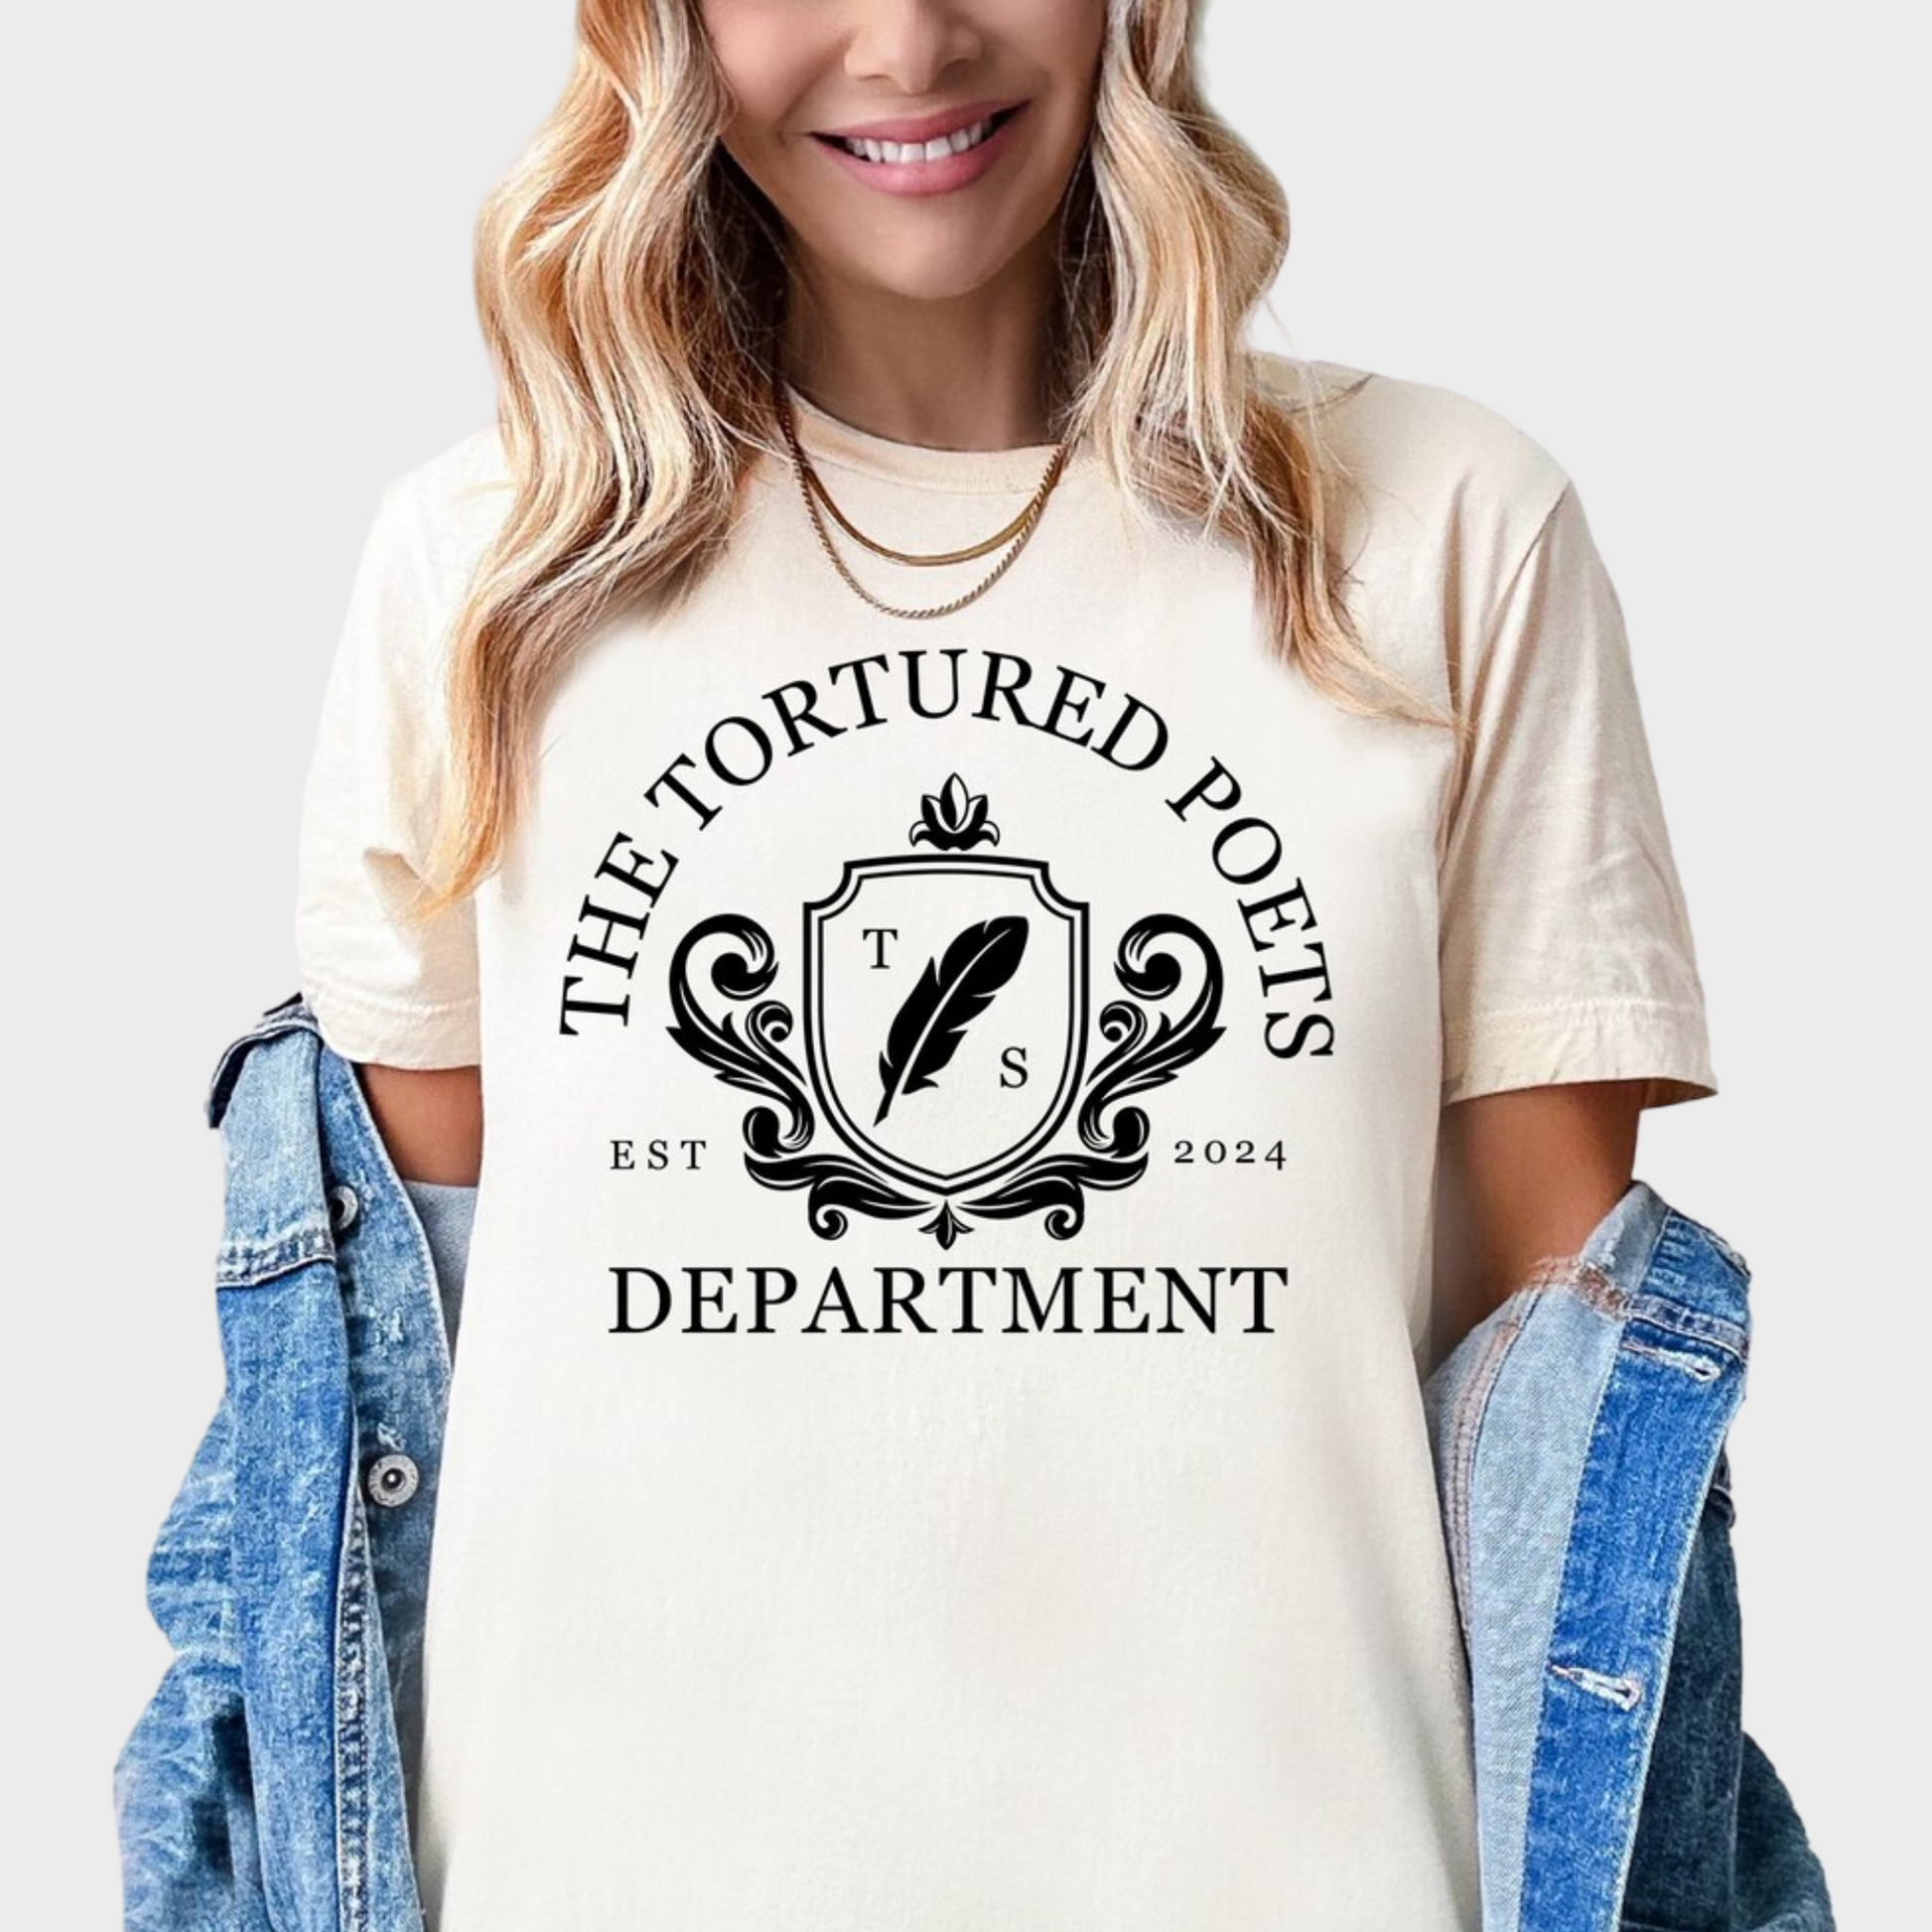 the Tortured Poets Department Shirt - White Embroidered TTPD Shirt